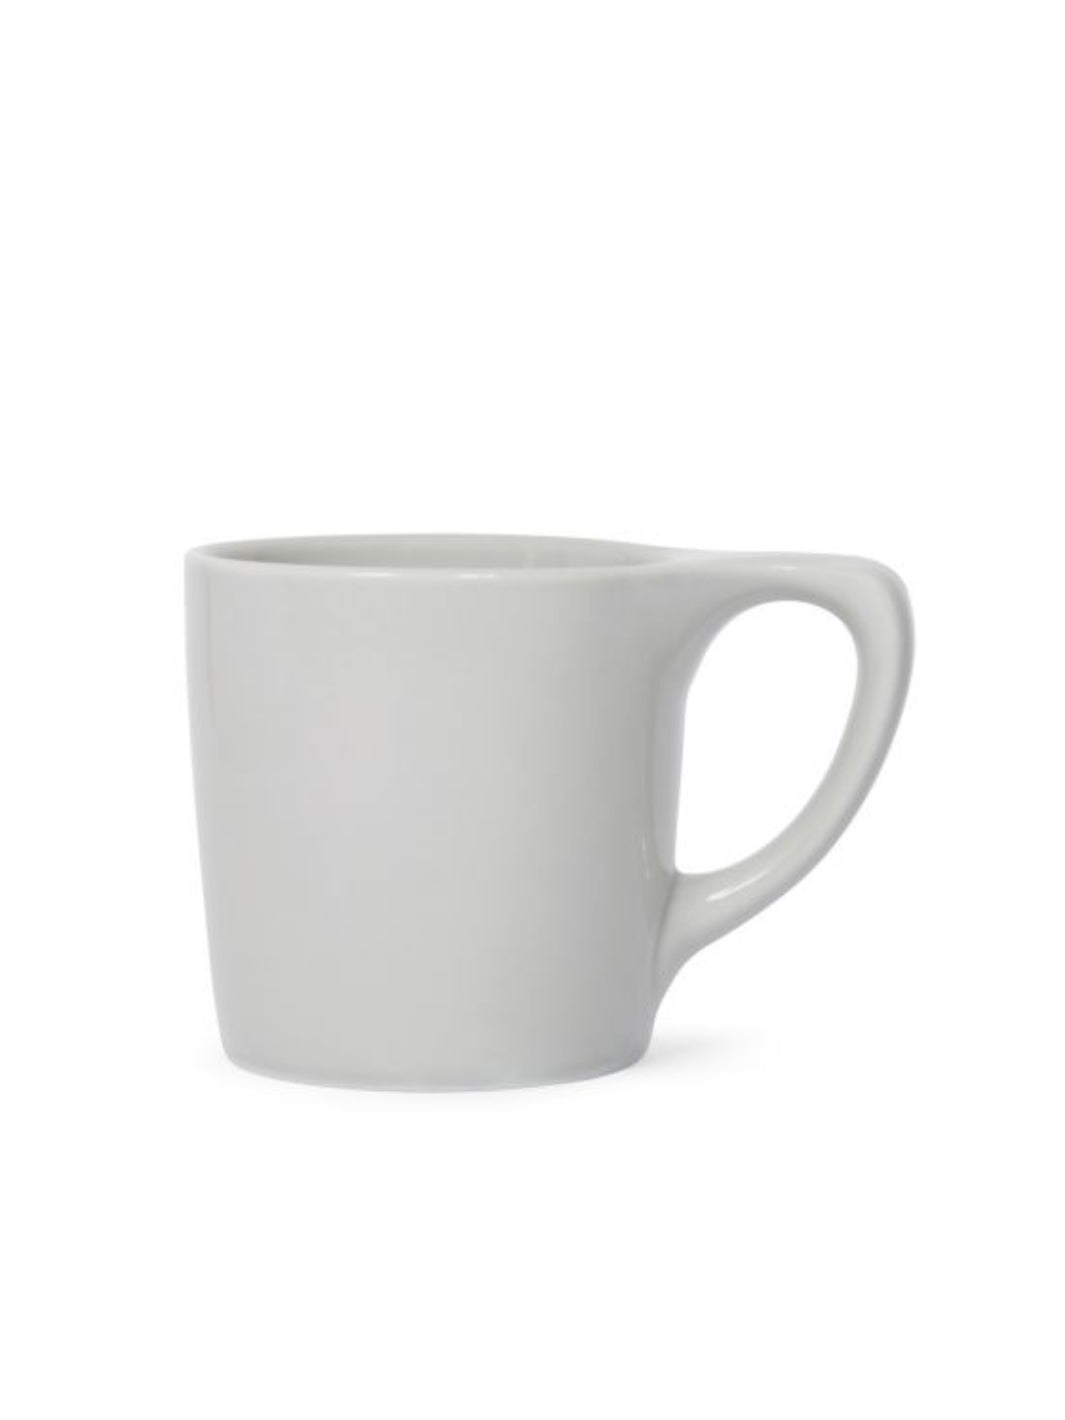 https://www.eightouncecoffsee.shop/wp-content/uploads/1700/77/well-discover-the-notneutral-lino-coffee-mug-10oz-296ml-notneutral-outlet-stores-suitable-for-you-and-our-team-of-experts_4.jpg